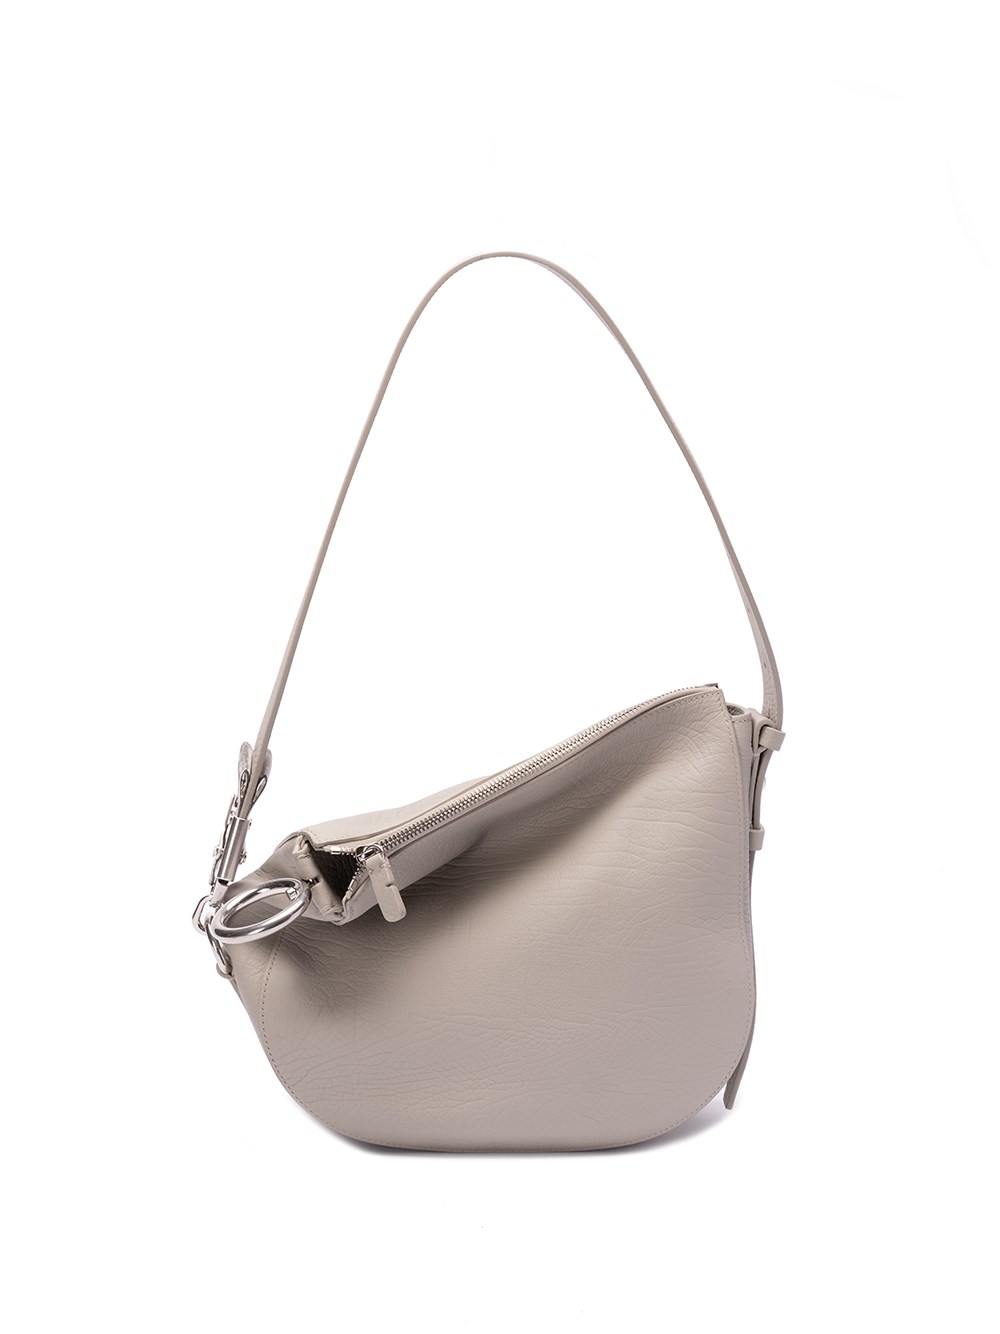 Burberry Small `knight` Shoulder Bag In Beige